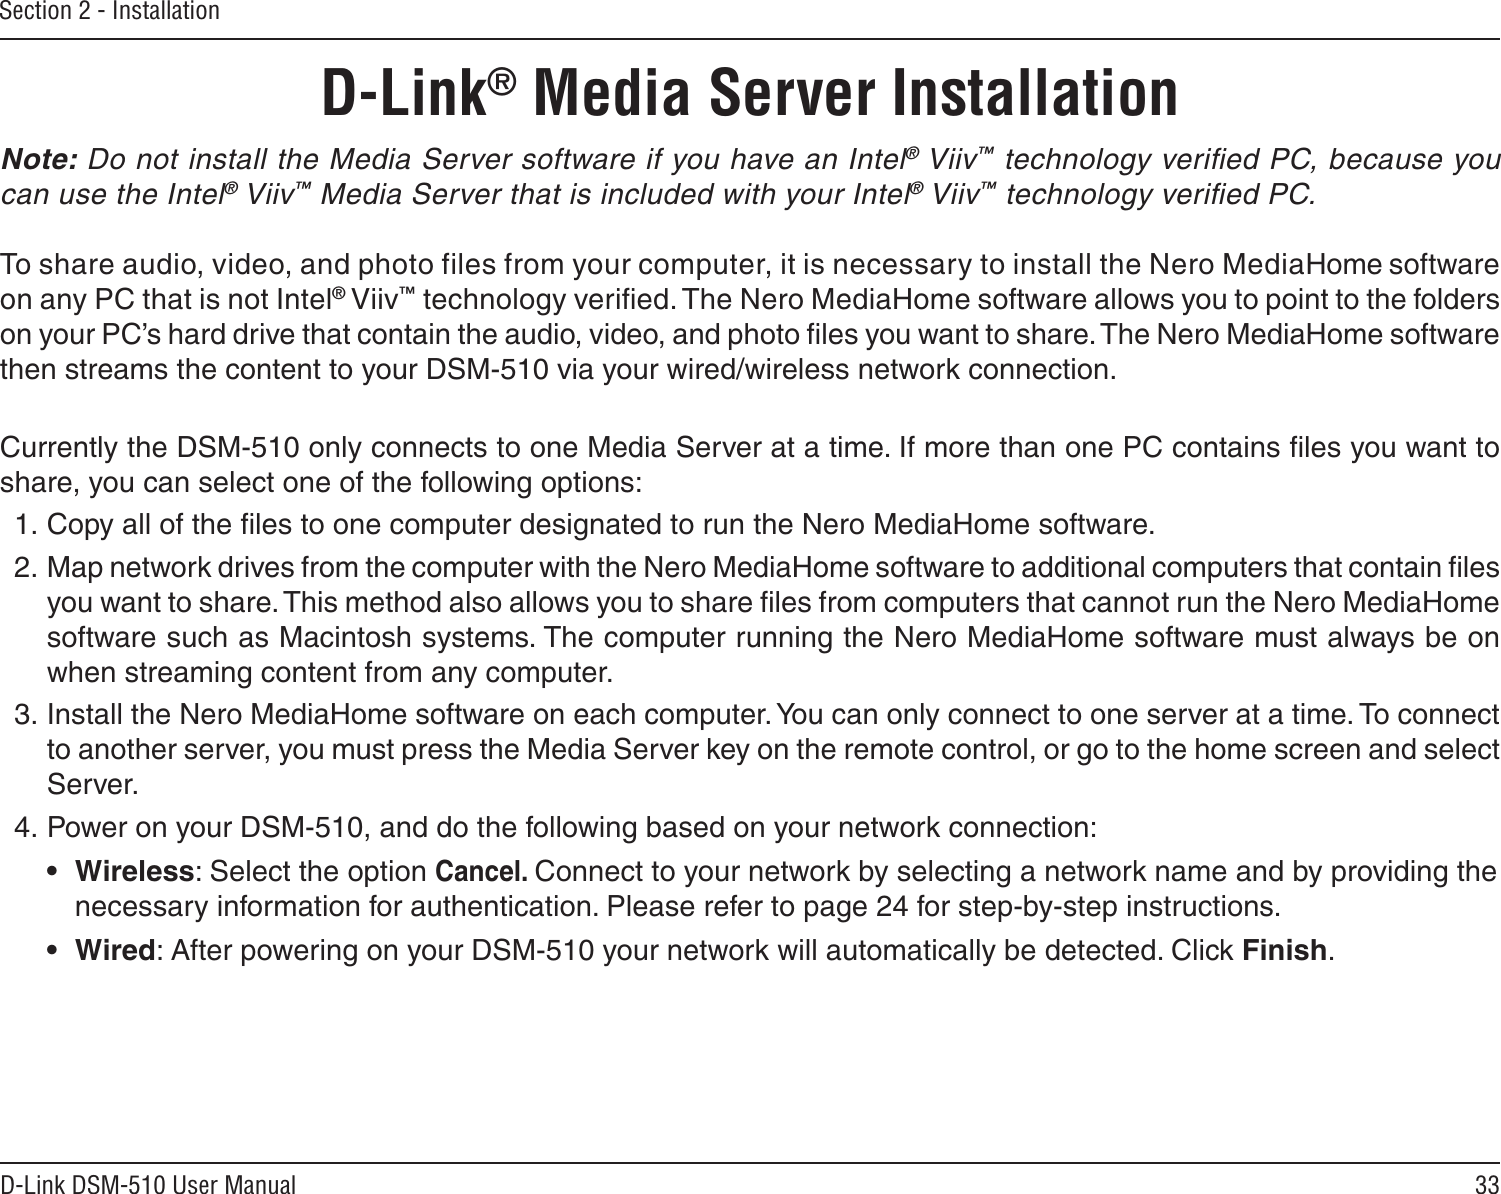 33D-Link DSM-510 User ManualSection 2 - InstallationNote: Do not install the Media Server software if you have an Intel® Viiv™ technology veriﬁed PC, because you can use the Intel® Viiv™ Media Server that is included with your Intel® Viiv™ technology veriﬁed PC.To share audio, video, and photo files from your computer, it is necessary to install the Nero MediaHome software on any PC that is not Intel® Viiv™ technology veriﬁed. The Nero MediaHome software allows you to point to the folders on your PC’s hard drive that contain the audio, video, and photo ﬁles you want to share. The Nero MediaHome software then streams the content to your DSM-510 via your wired/wireless network connection. Currently the DSM-510 only connects to one Media Server at a time. If more than one PC contains ﬁles you want to share, you can select one of the following options:1. Copy all of the ﬁles to one computer designated to run the Nero MediaHome software.2. Map network drives from the computer with the Nero MediaHome software to additional computers that contain ﬁles you want to share. This method also allows you to share ﬁles from computers that cannot run the Nero MediaHome software such as Macintosh systems. The computer running the Nero MediaHome software must always be on when streaming content from any computer.  3. Install the Nero MediaHome software on each computer. You can only connect to one server at a time. To connect to another server, you must press the Media Server key on the remote control, or go to the home screen and select Server. 4. Power on your DSM-510, and do the following based on your network connection:   •  Wireless: Select the option Cancel. Connect to your network by selecting a network name and by providing the    necessary information for authentication. Please refer to page 24 for step-by-step instructions.   •  Wired: After powering on your DSM-510 your network will automatically be detected. Click Finish.    D-Link® Media Server Installation